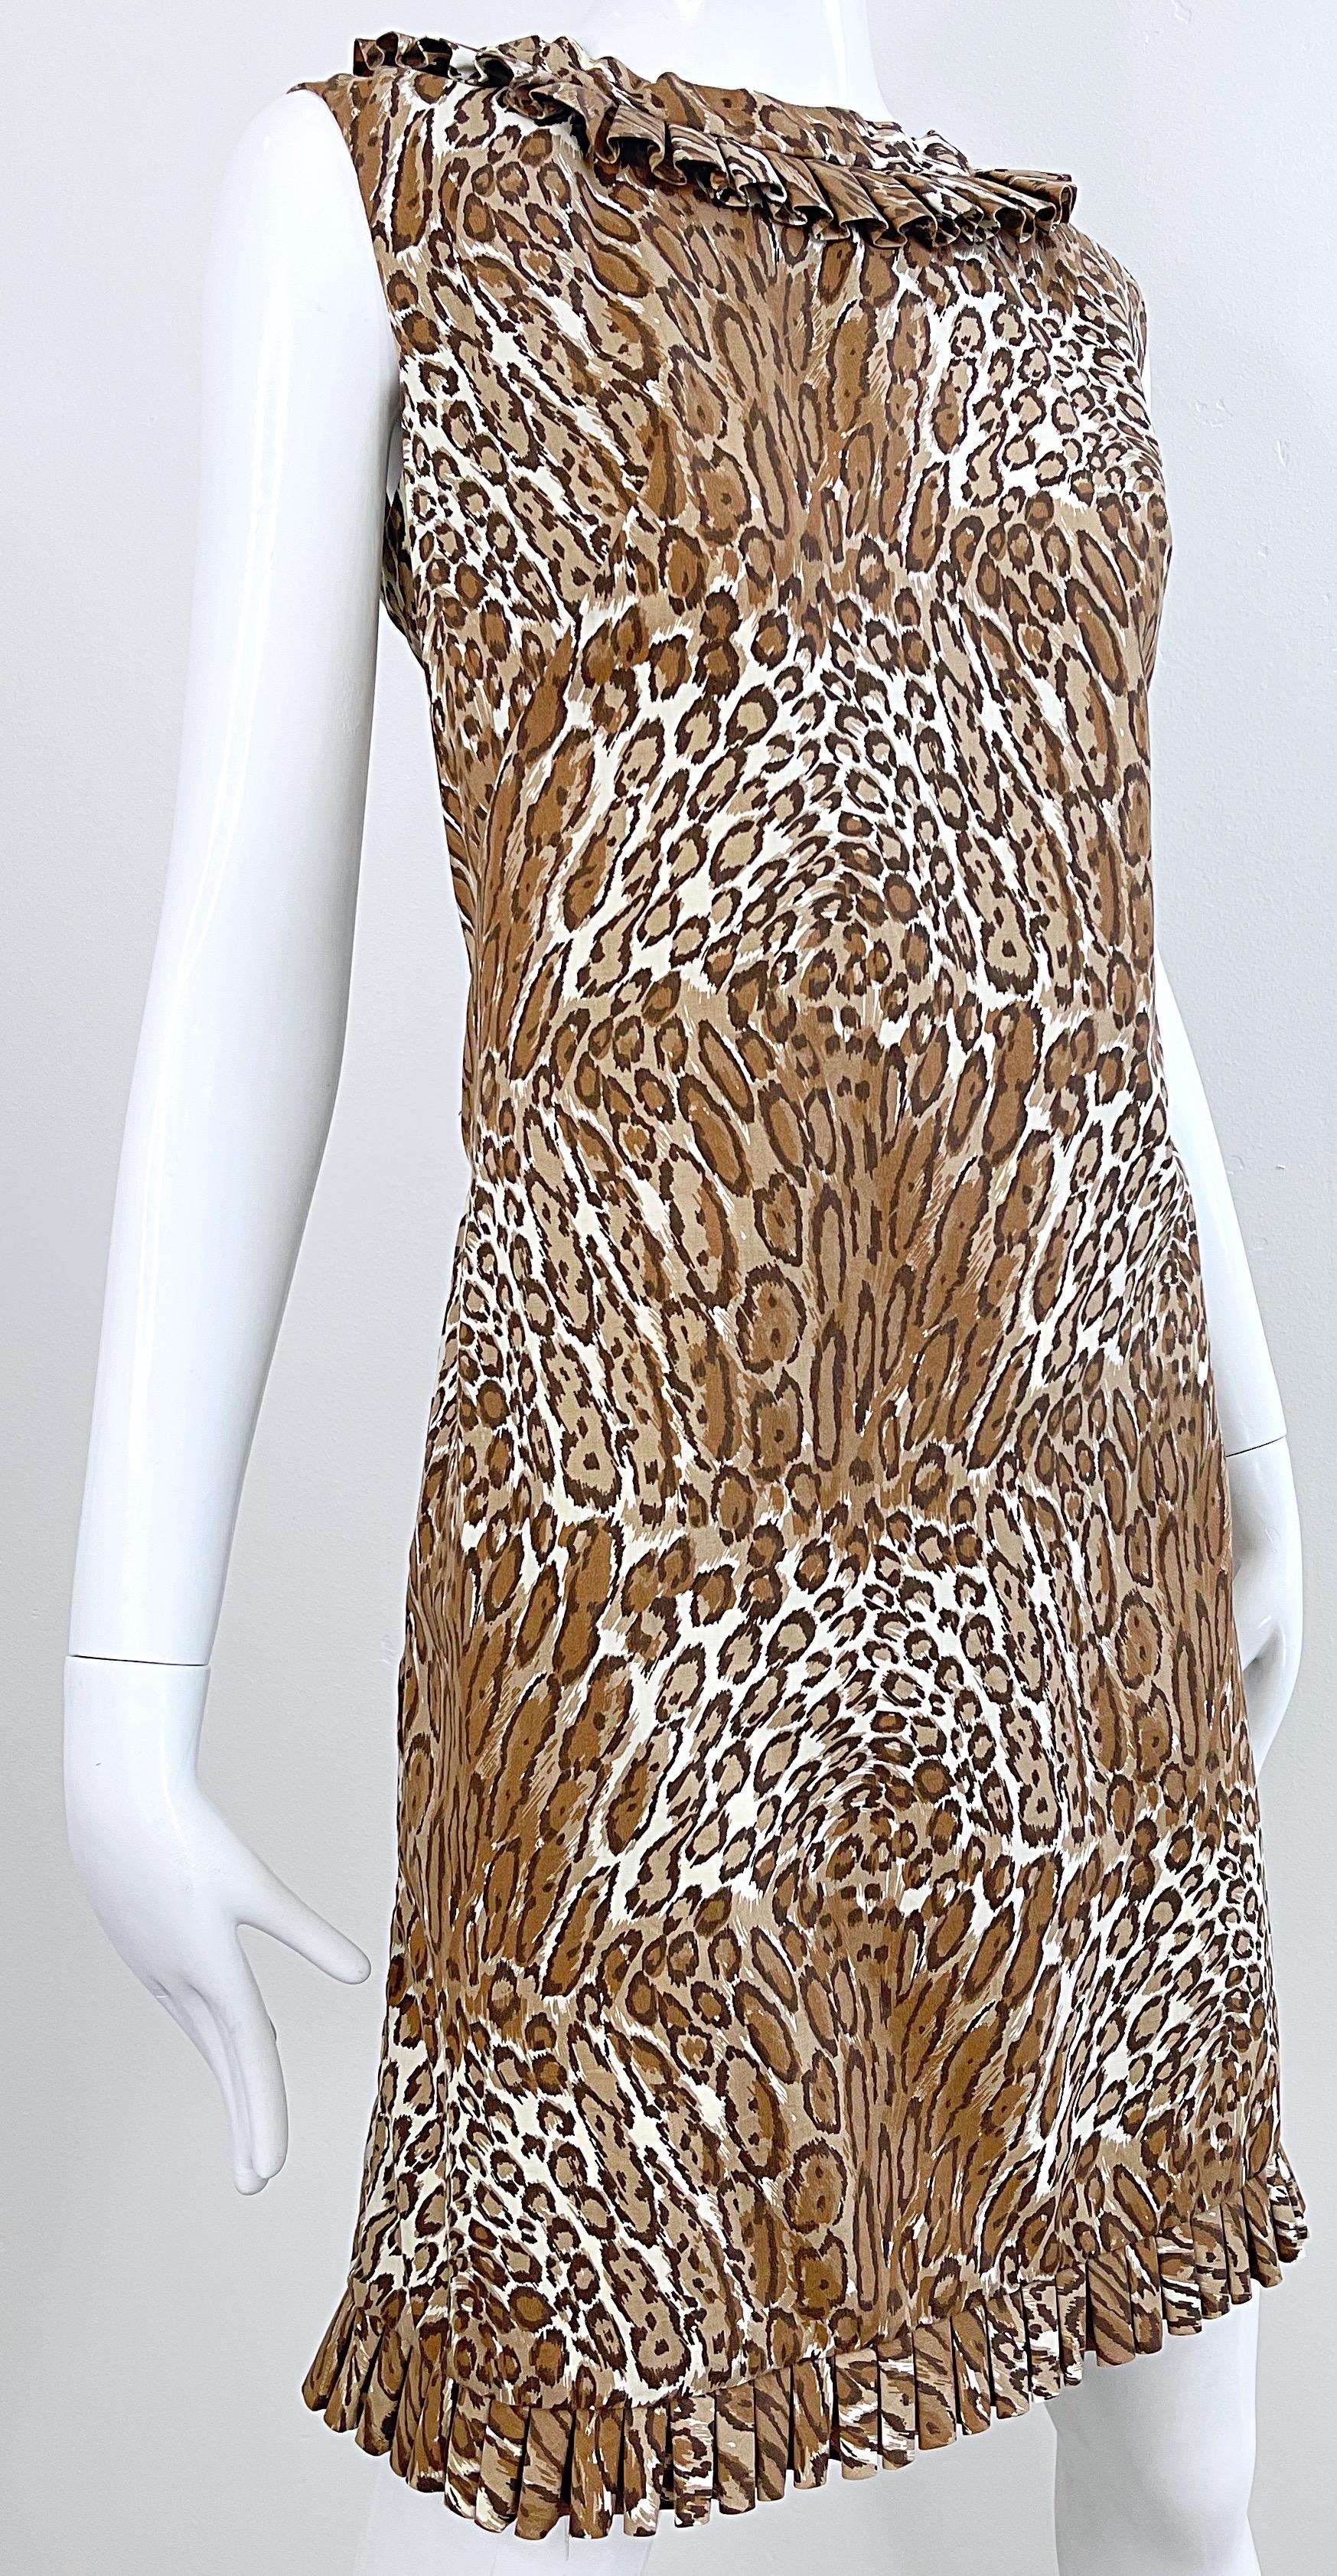 1960s Chic Leopard Cheetah Animal Abstract Print Cotton Vintage 60s Shift Dress 1